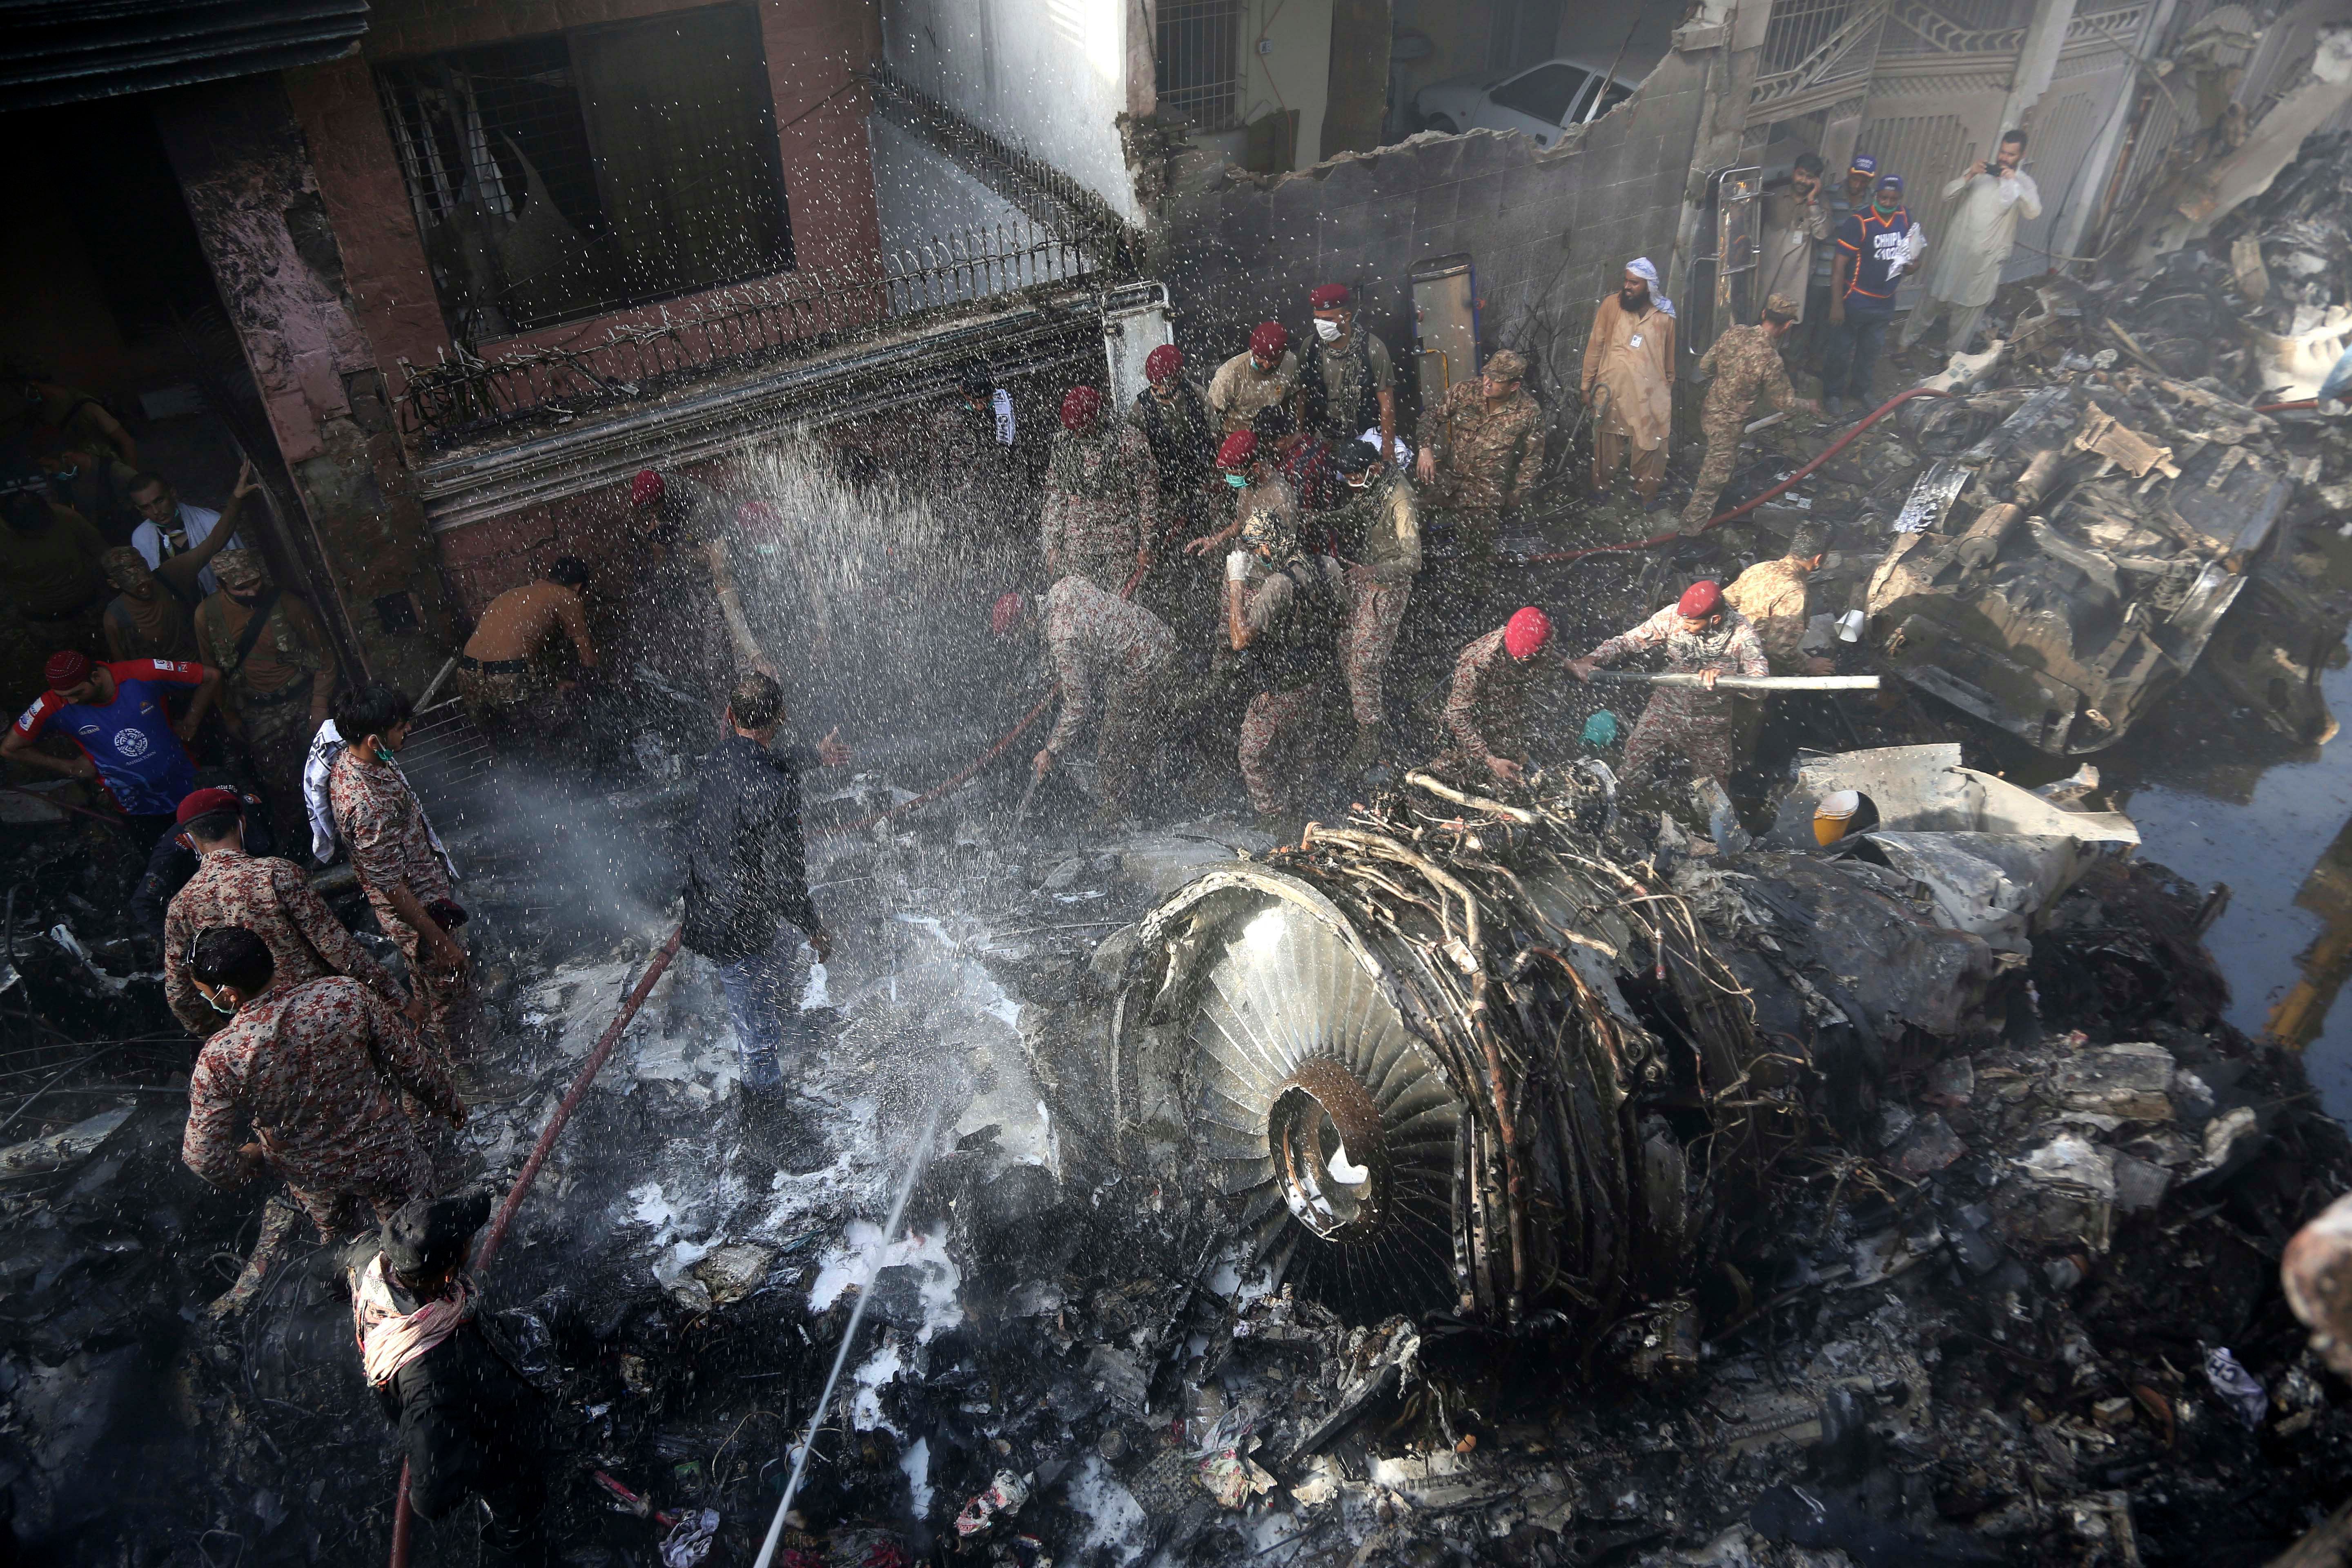 Volunteers look for survivors of a plane that crashed in residential area of Karachi, Pakistan. (AP photo)